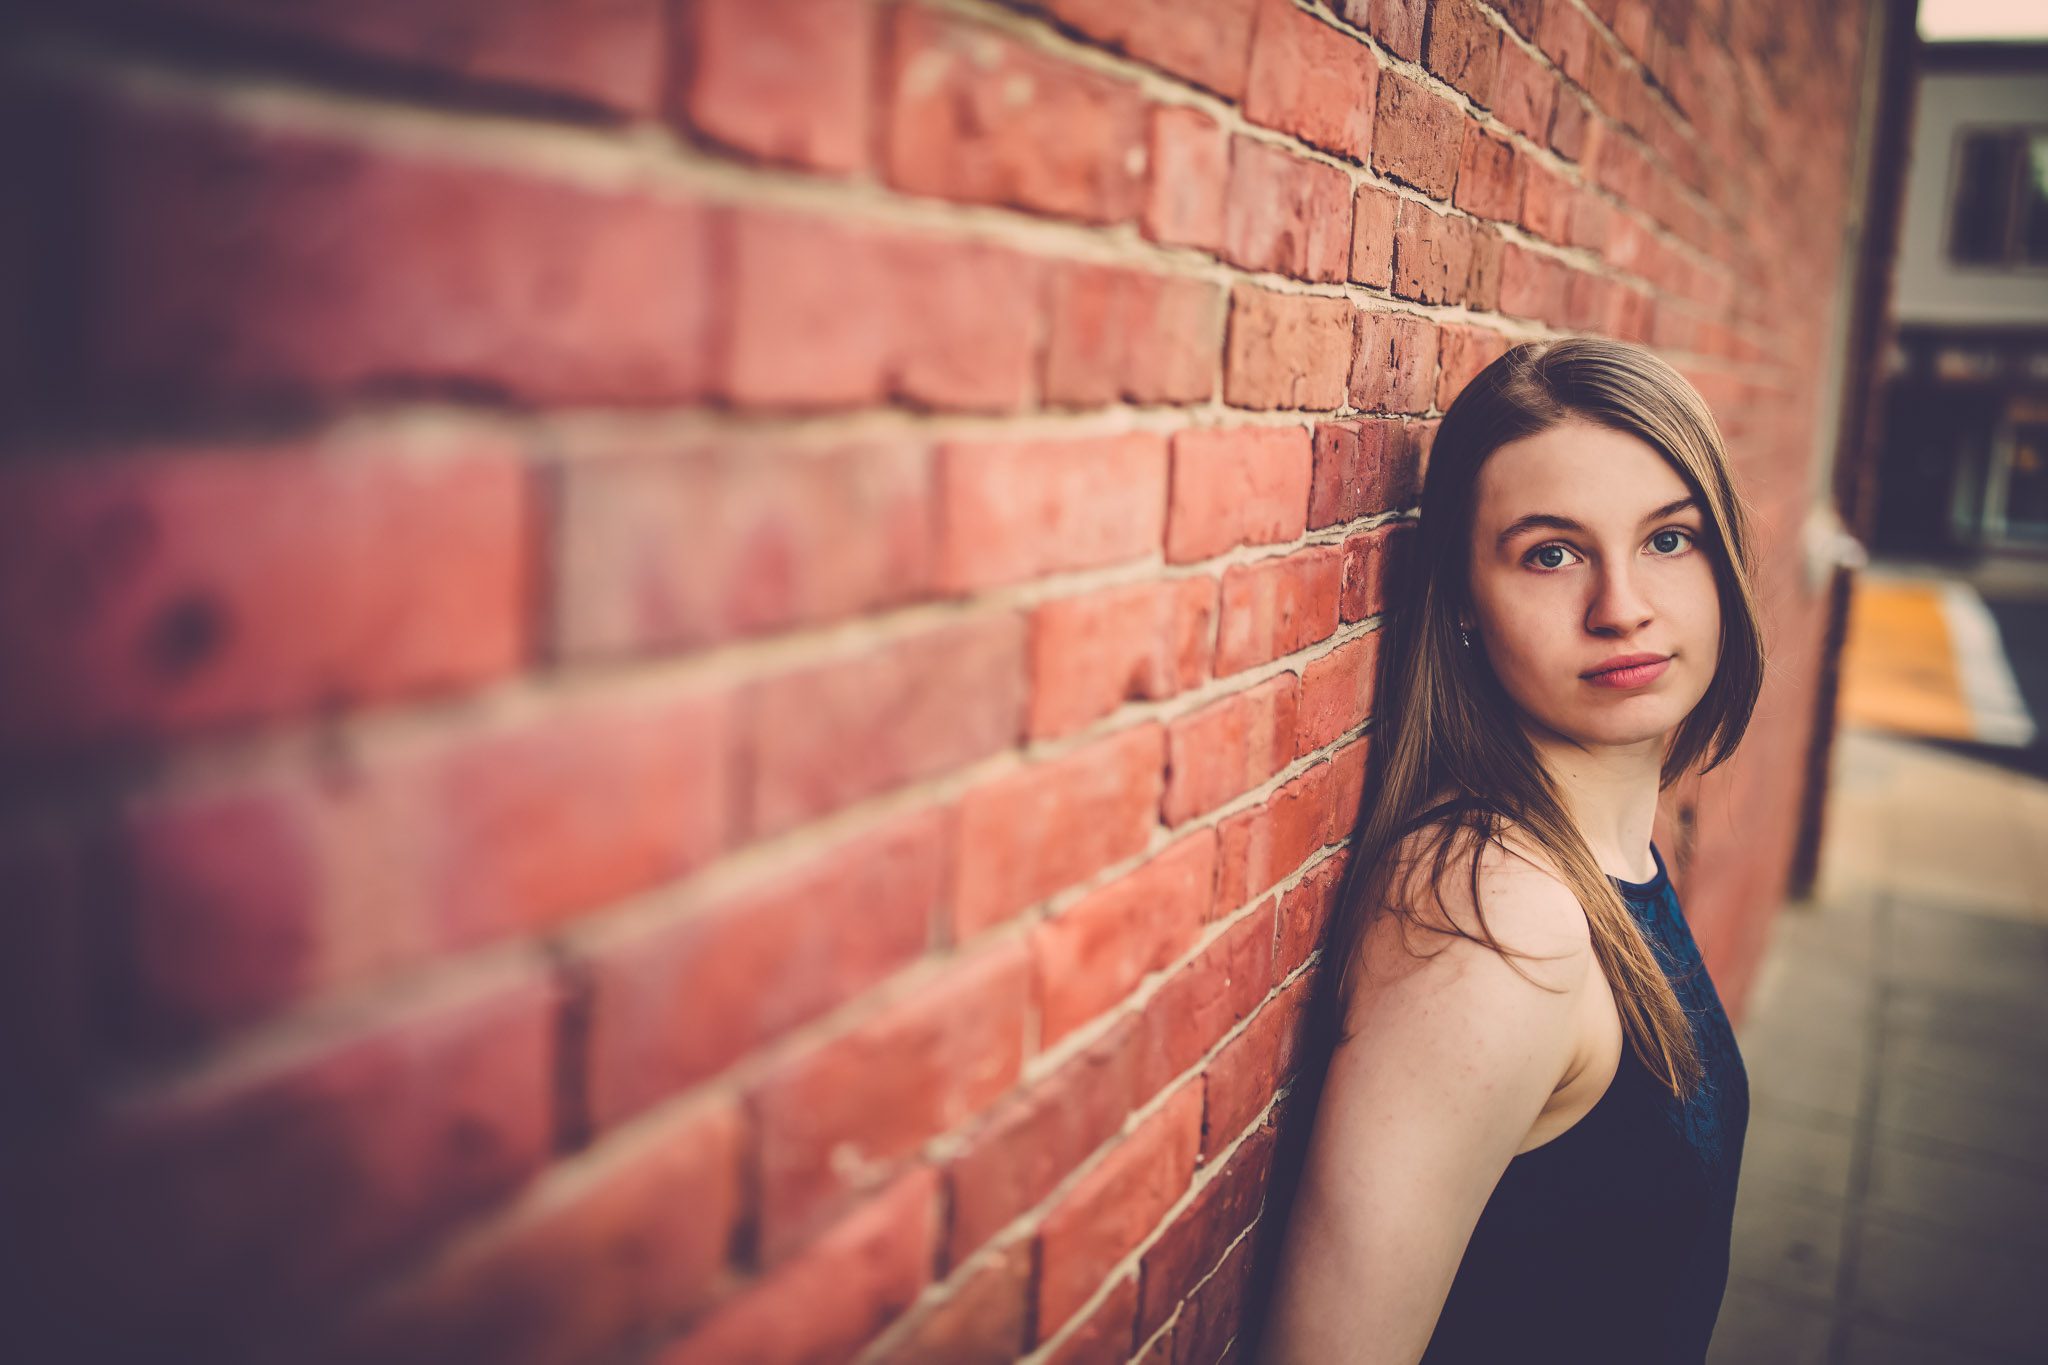 Senior portrait of a young woman in a blue dress leaning against a brick wall in a city in Massachusetts